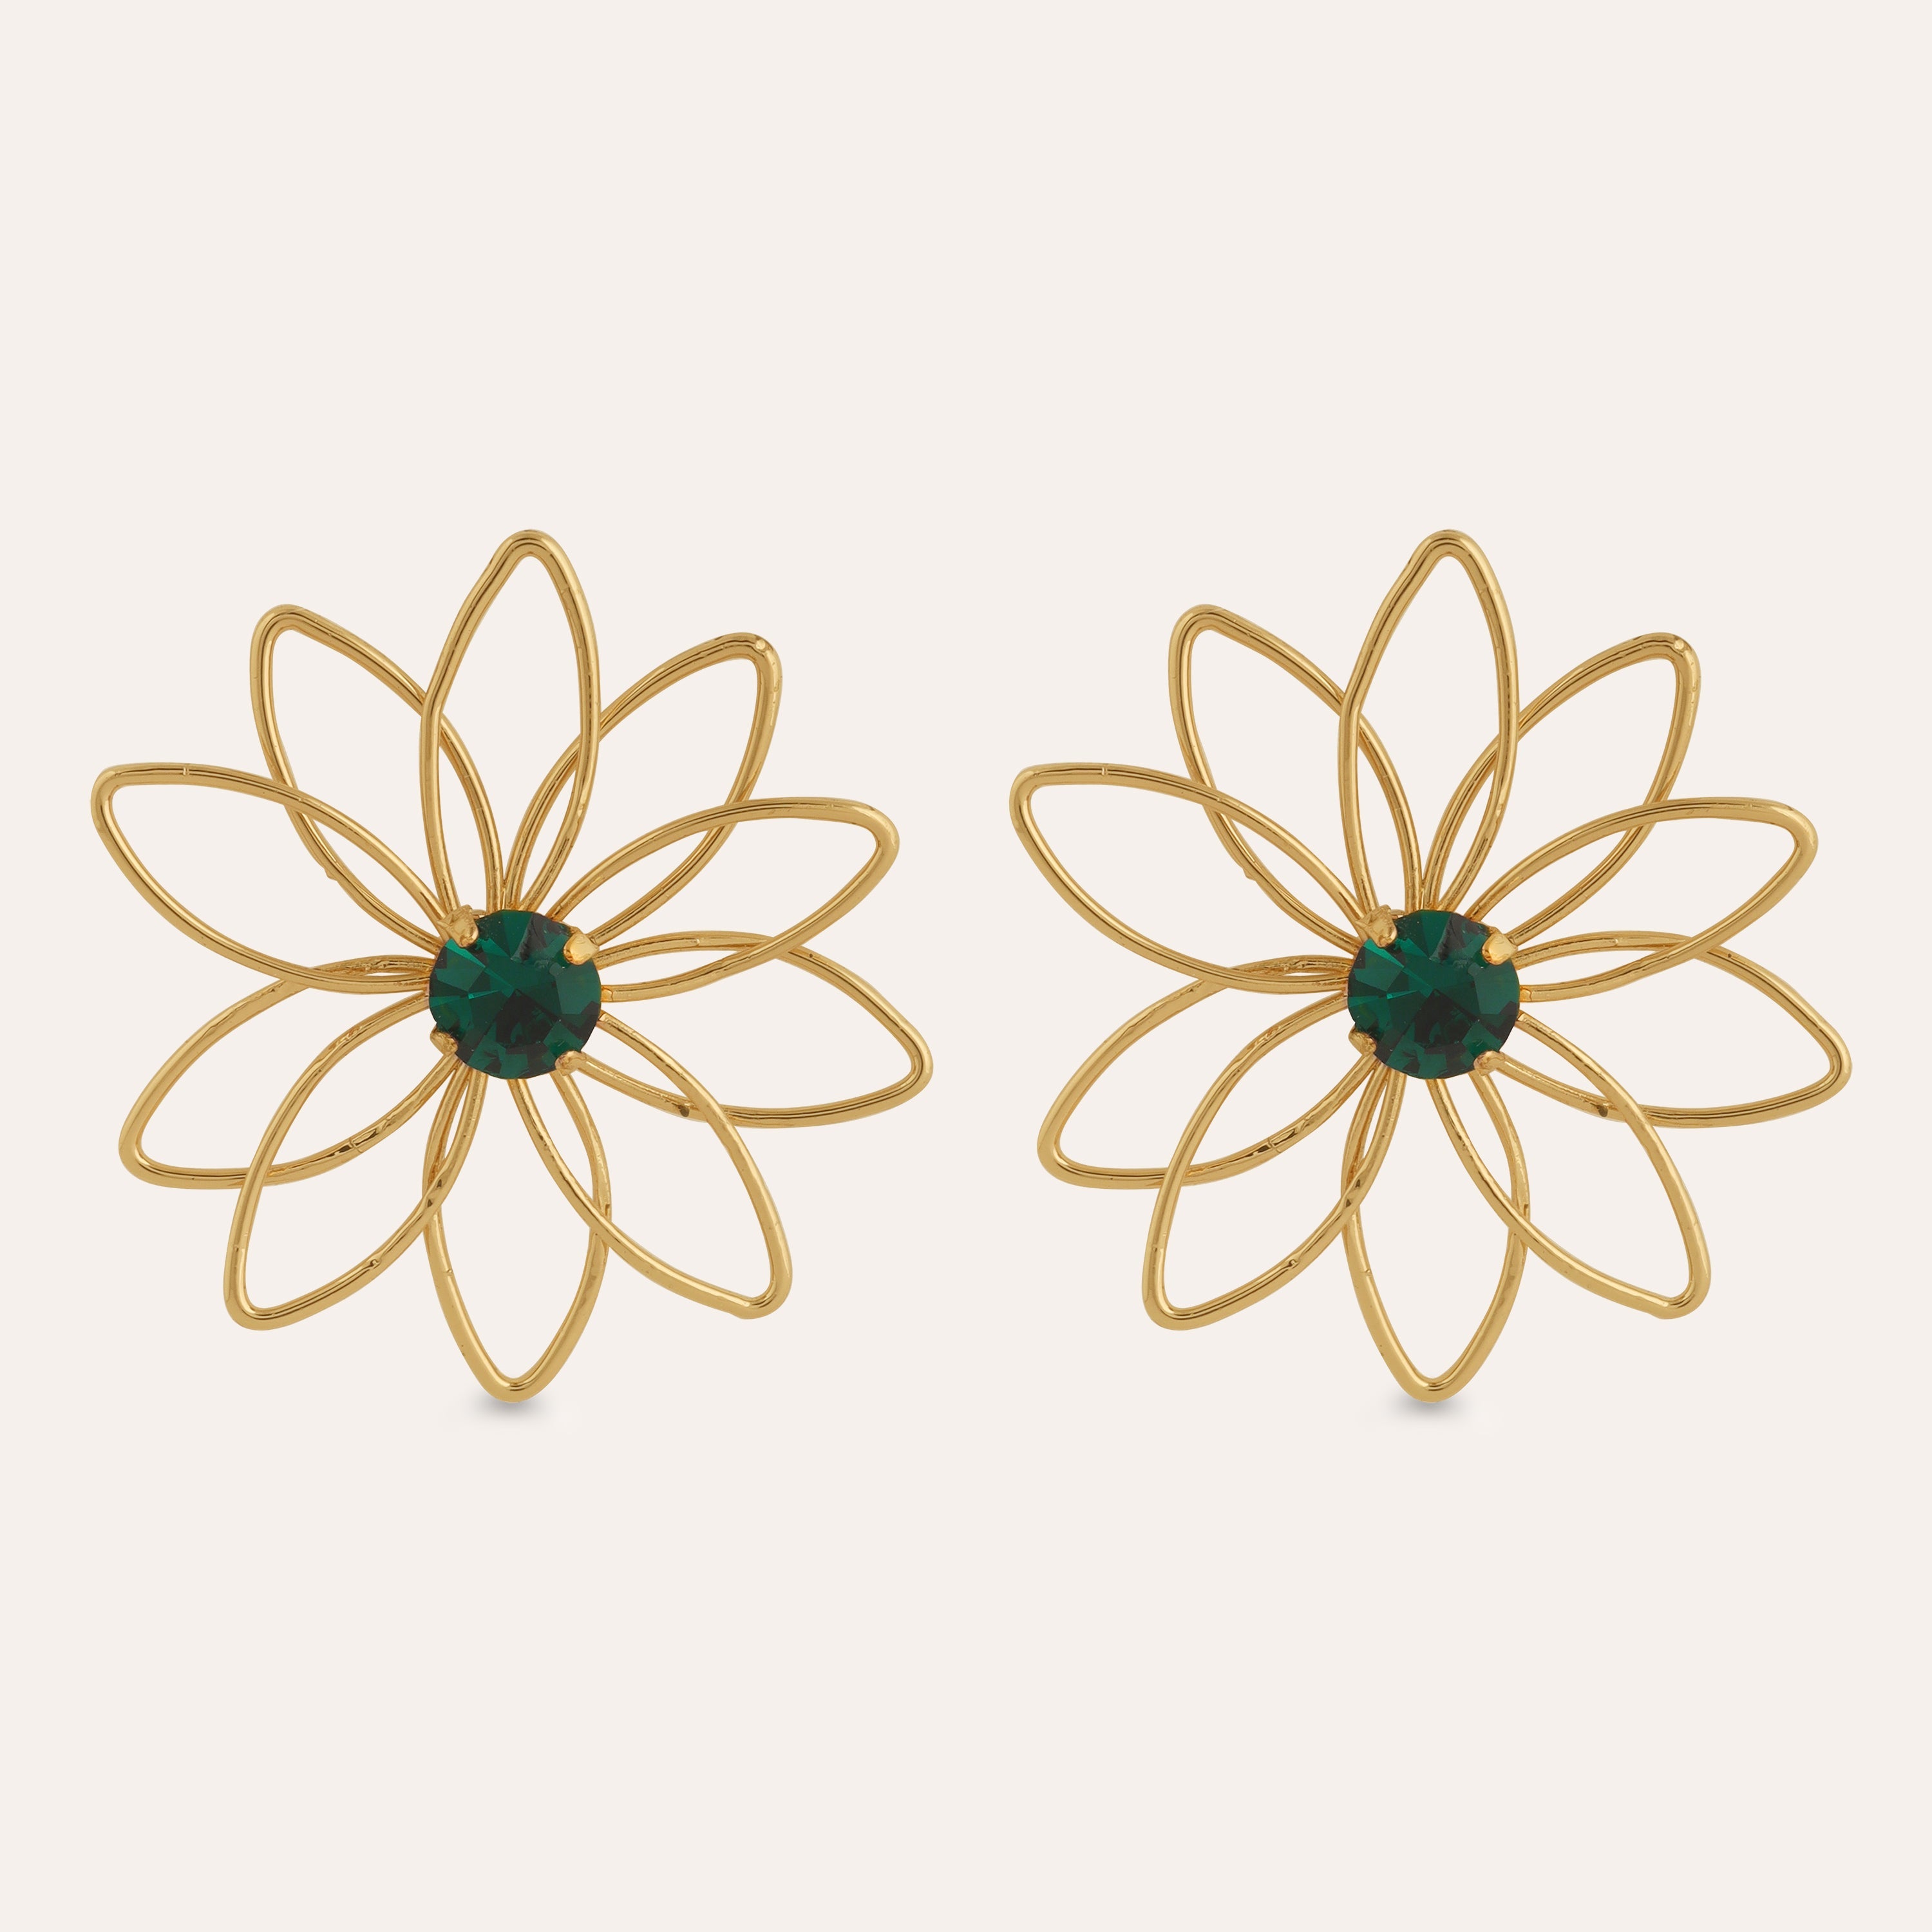 Yhpup Tarnish Free Vintage Gold Color Stainless Steel Flower Metal Stud  Earrings for Women Individual Stylish Trendy Jewelry